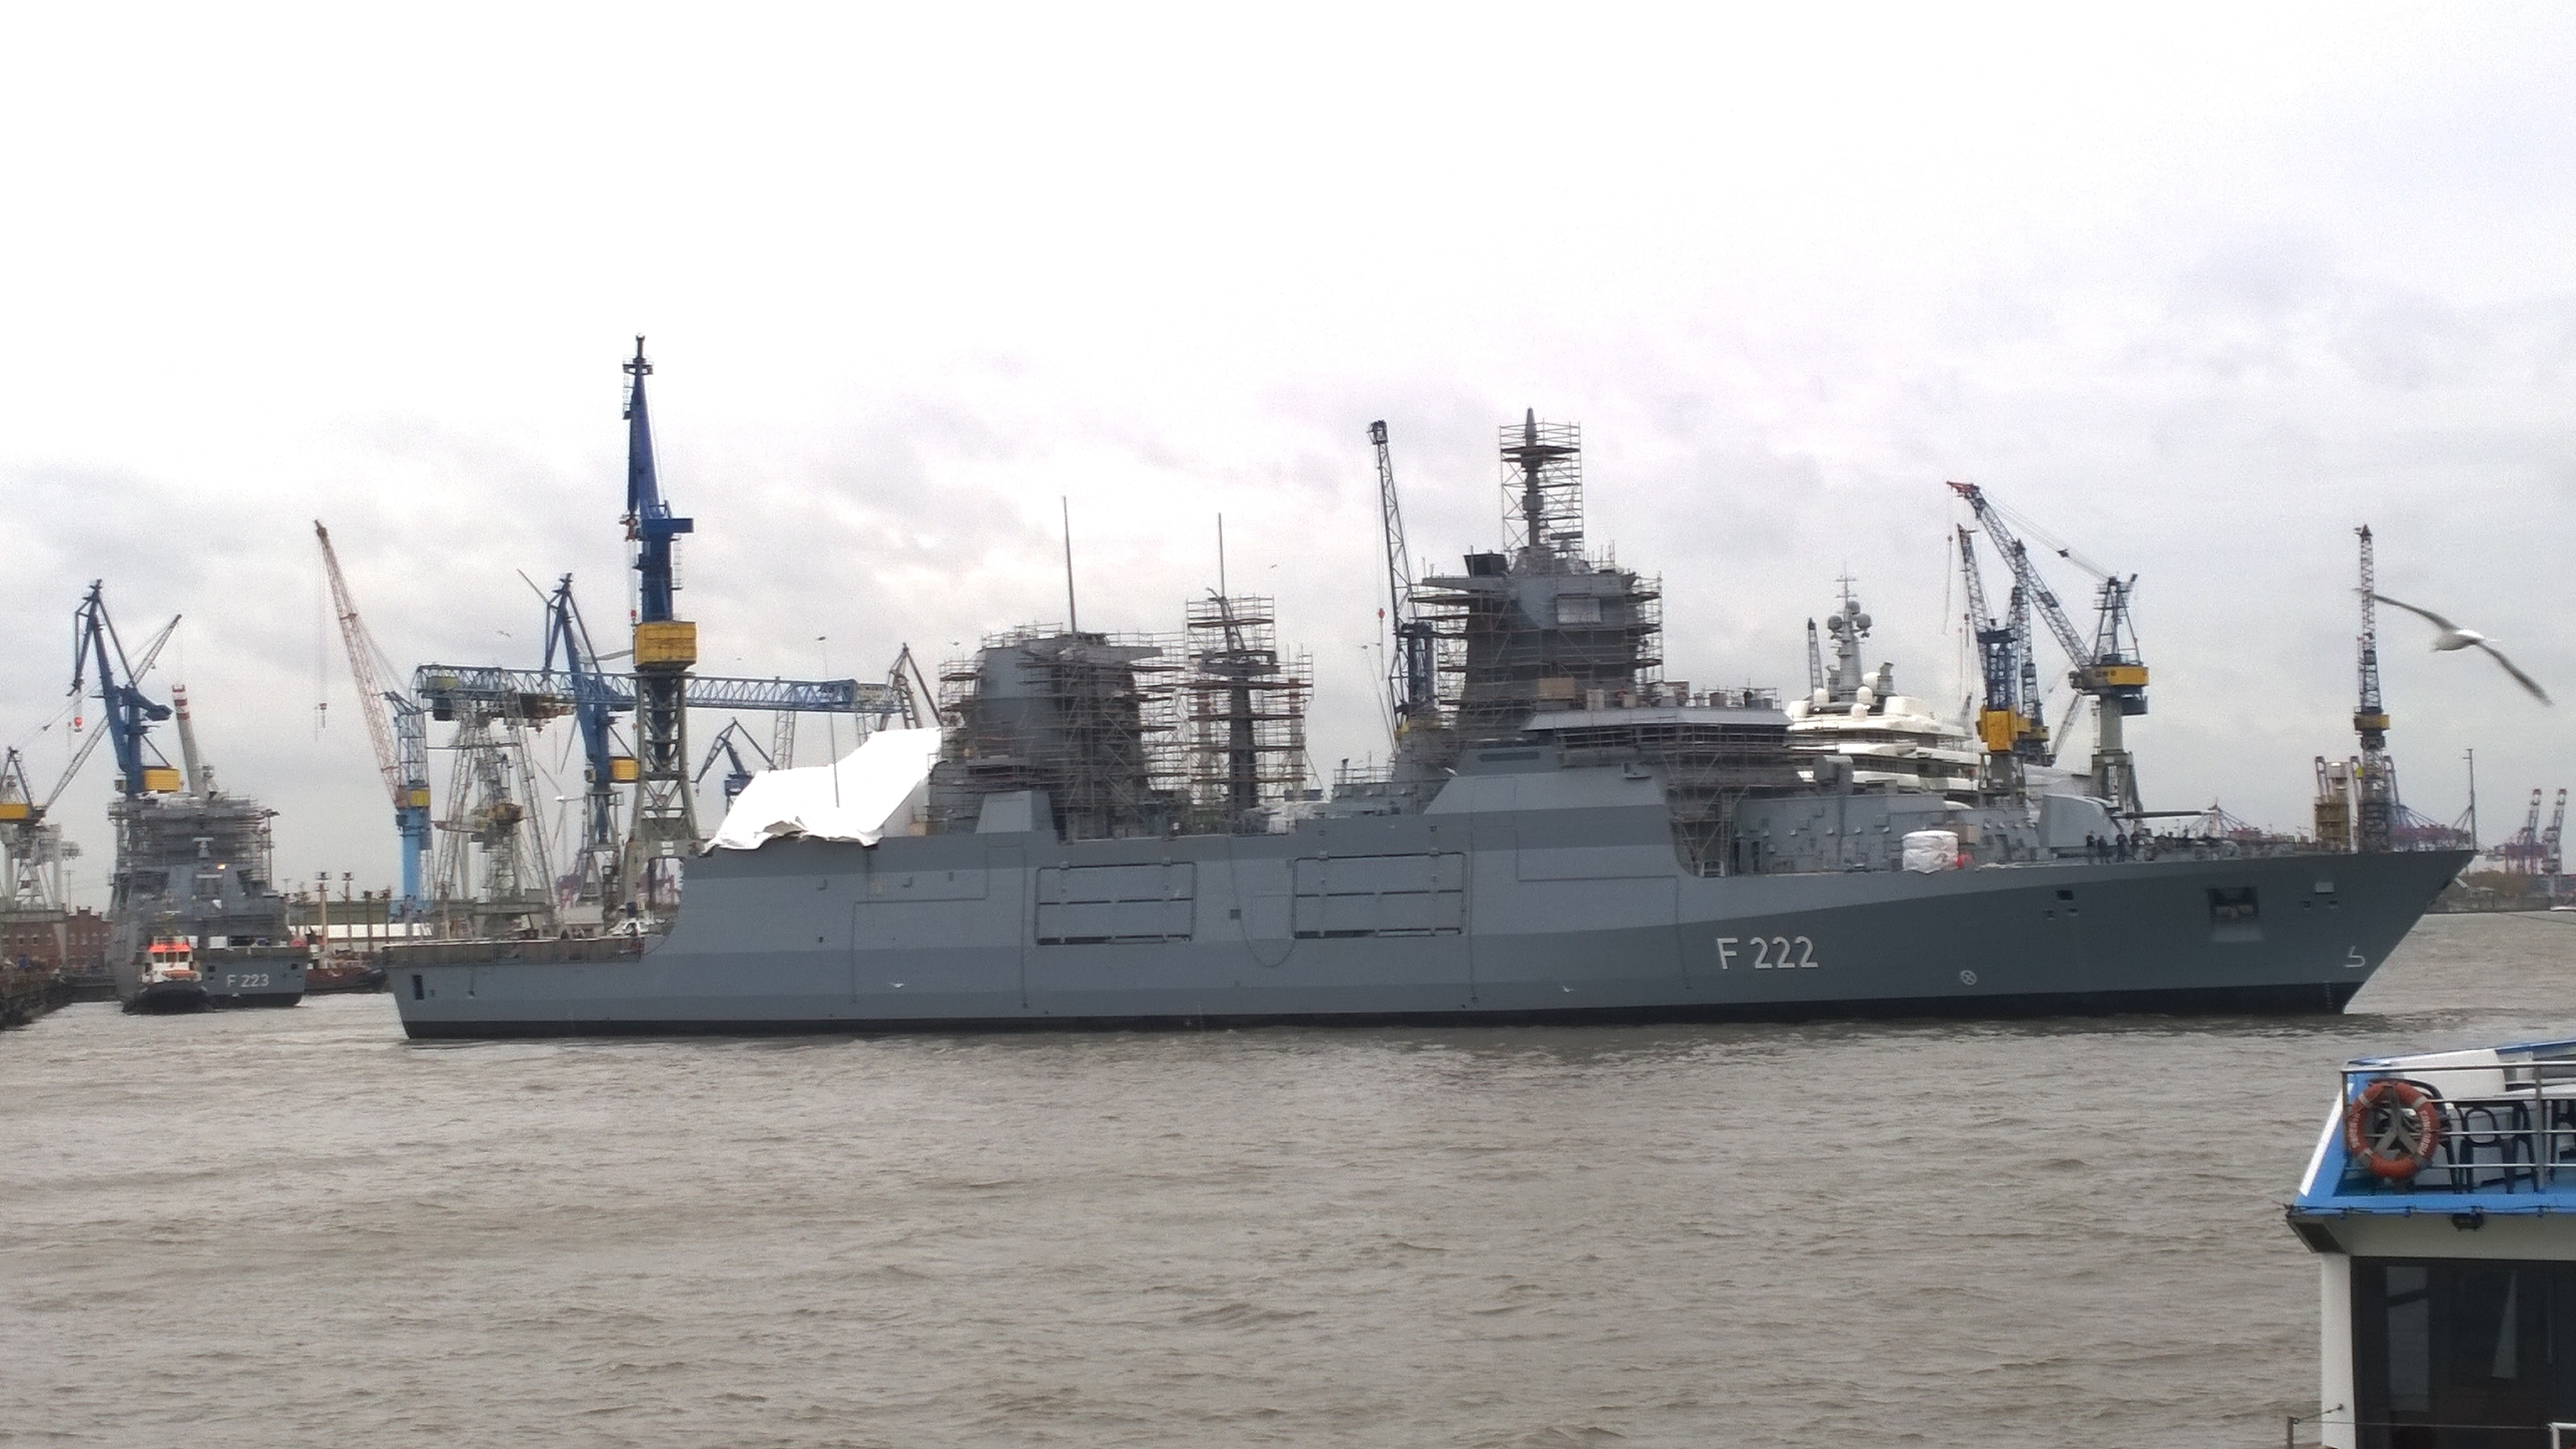 The_frigate_F222_Baden-W%C3%BCrttemberg_will_be_dragged_into_the_dock_17_of_the_B_%26_V_shipyard.jpg